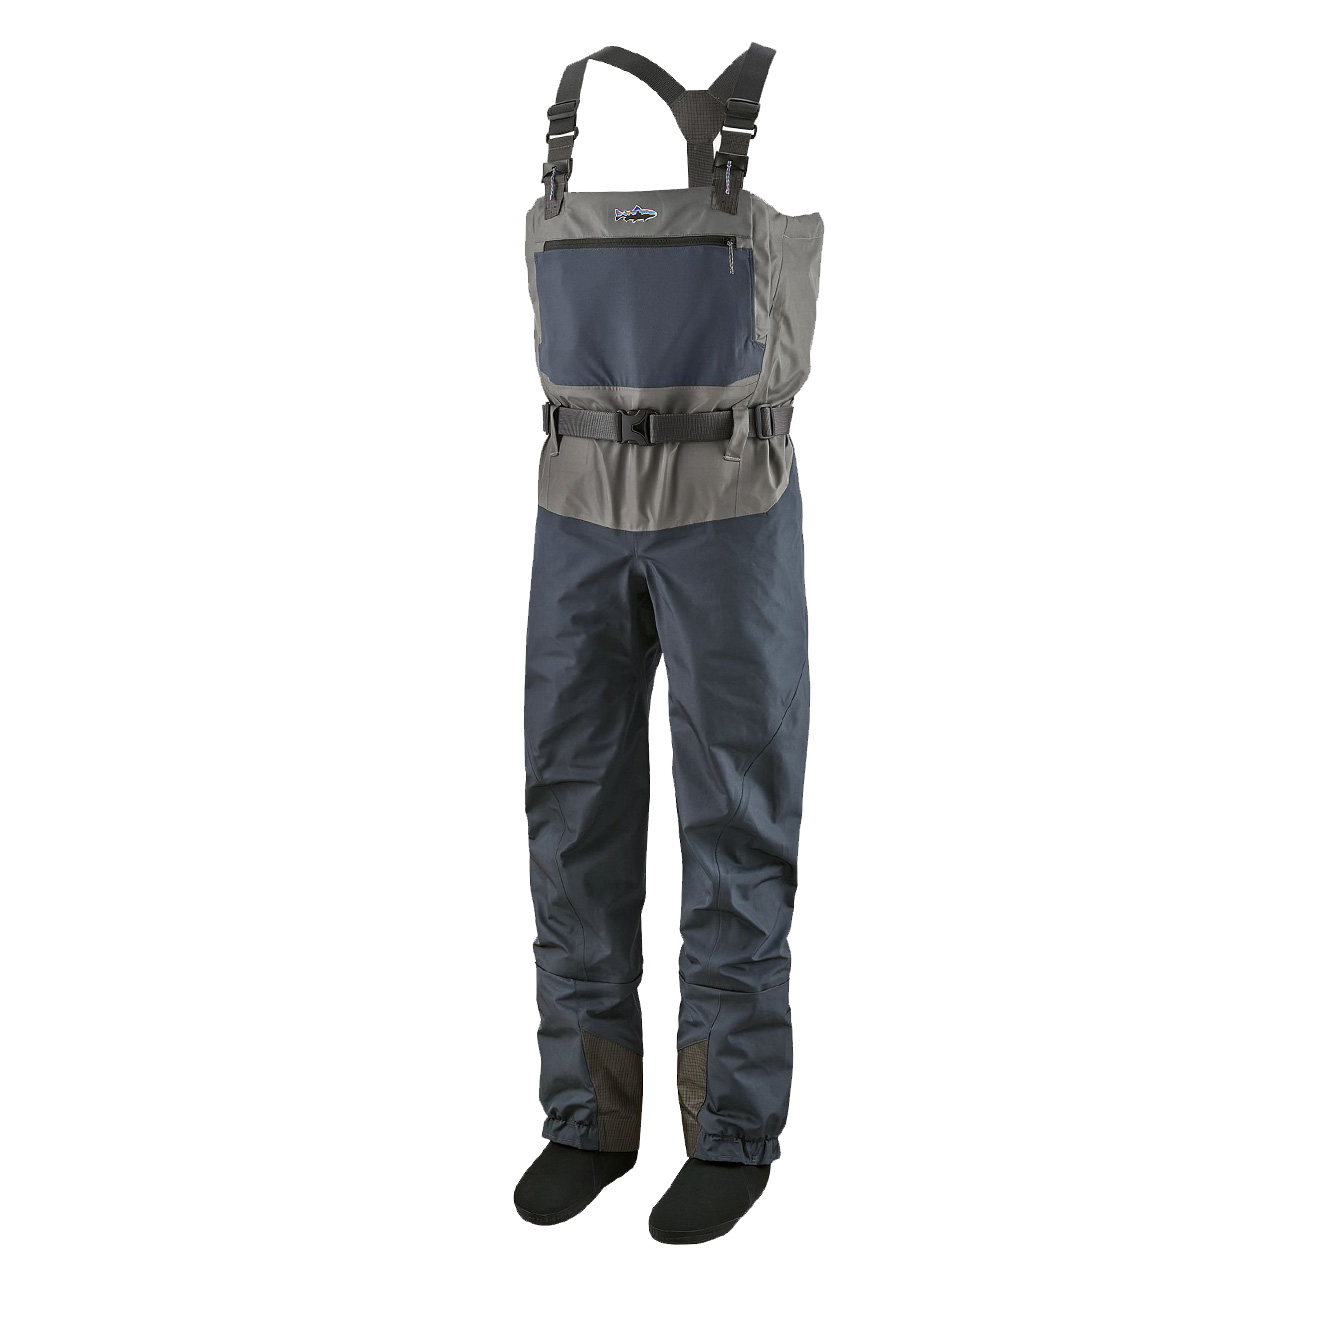 Patagonia Men's Swiftcurrent Wader - 2RM